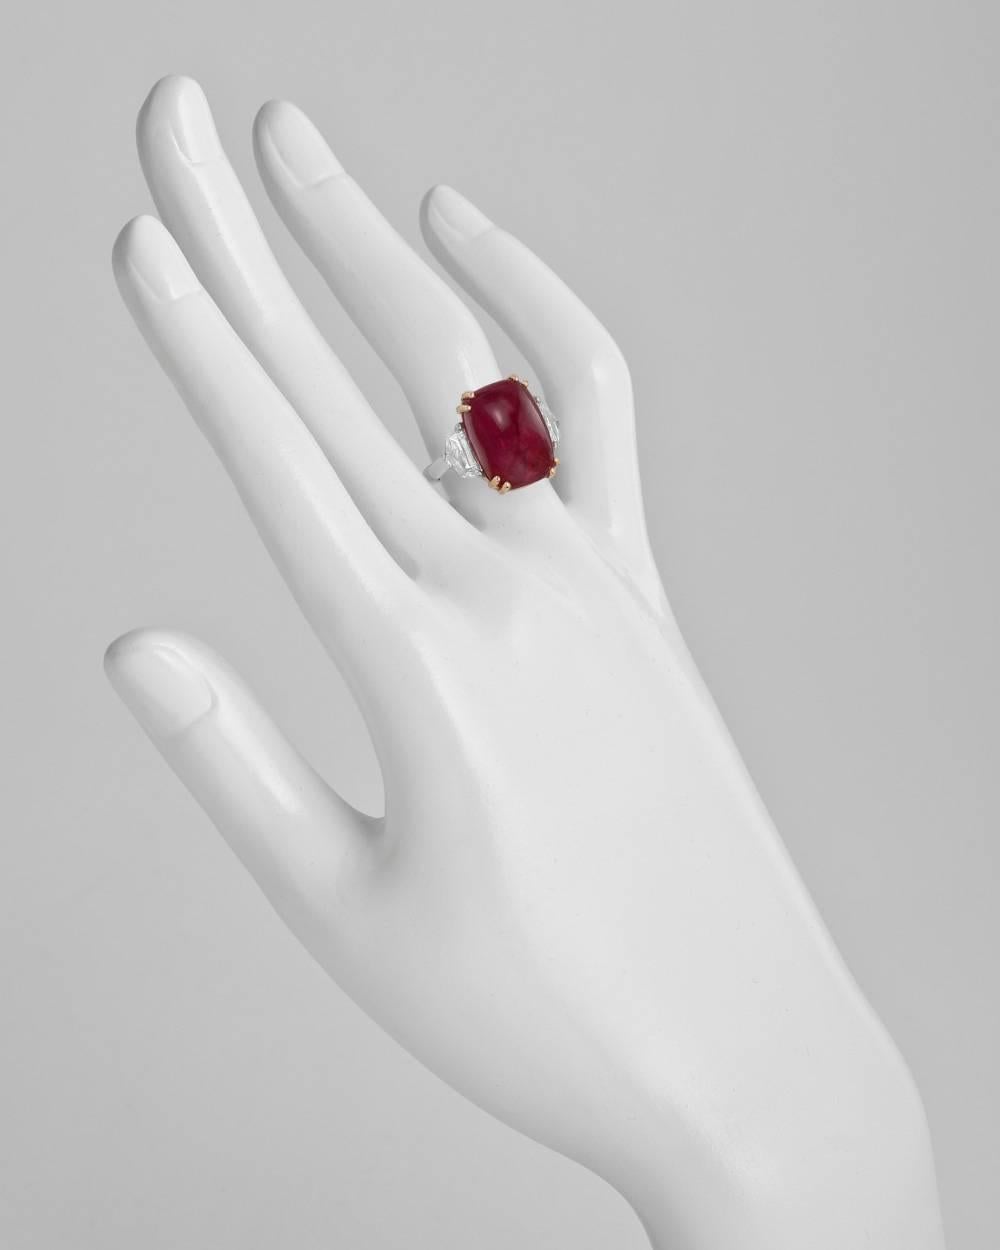 Ruby and diamond ring, centering a sugarloaf cabochon-cut natural ruby weighing 15.15 carats, flanked by two colorless epaulette-cut diamonds weighing approximately 1.31 total carats (F-color, VS1-VS2 clarity), mounted in platinum and 18k yellow